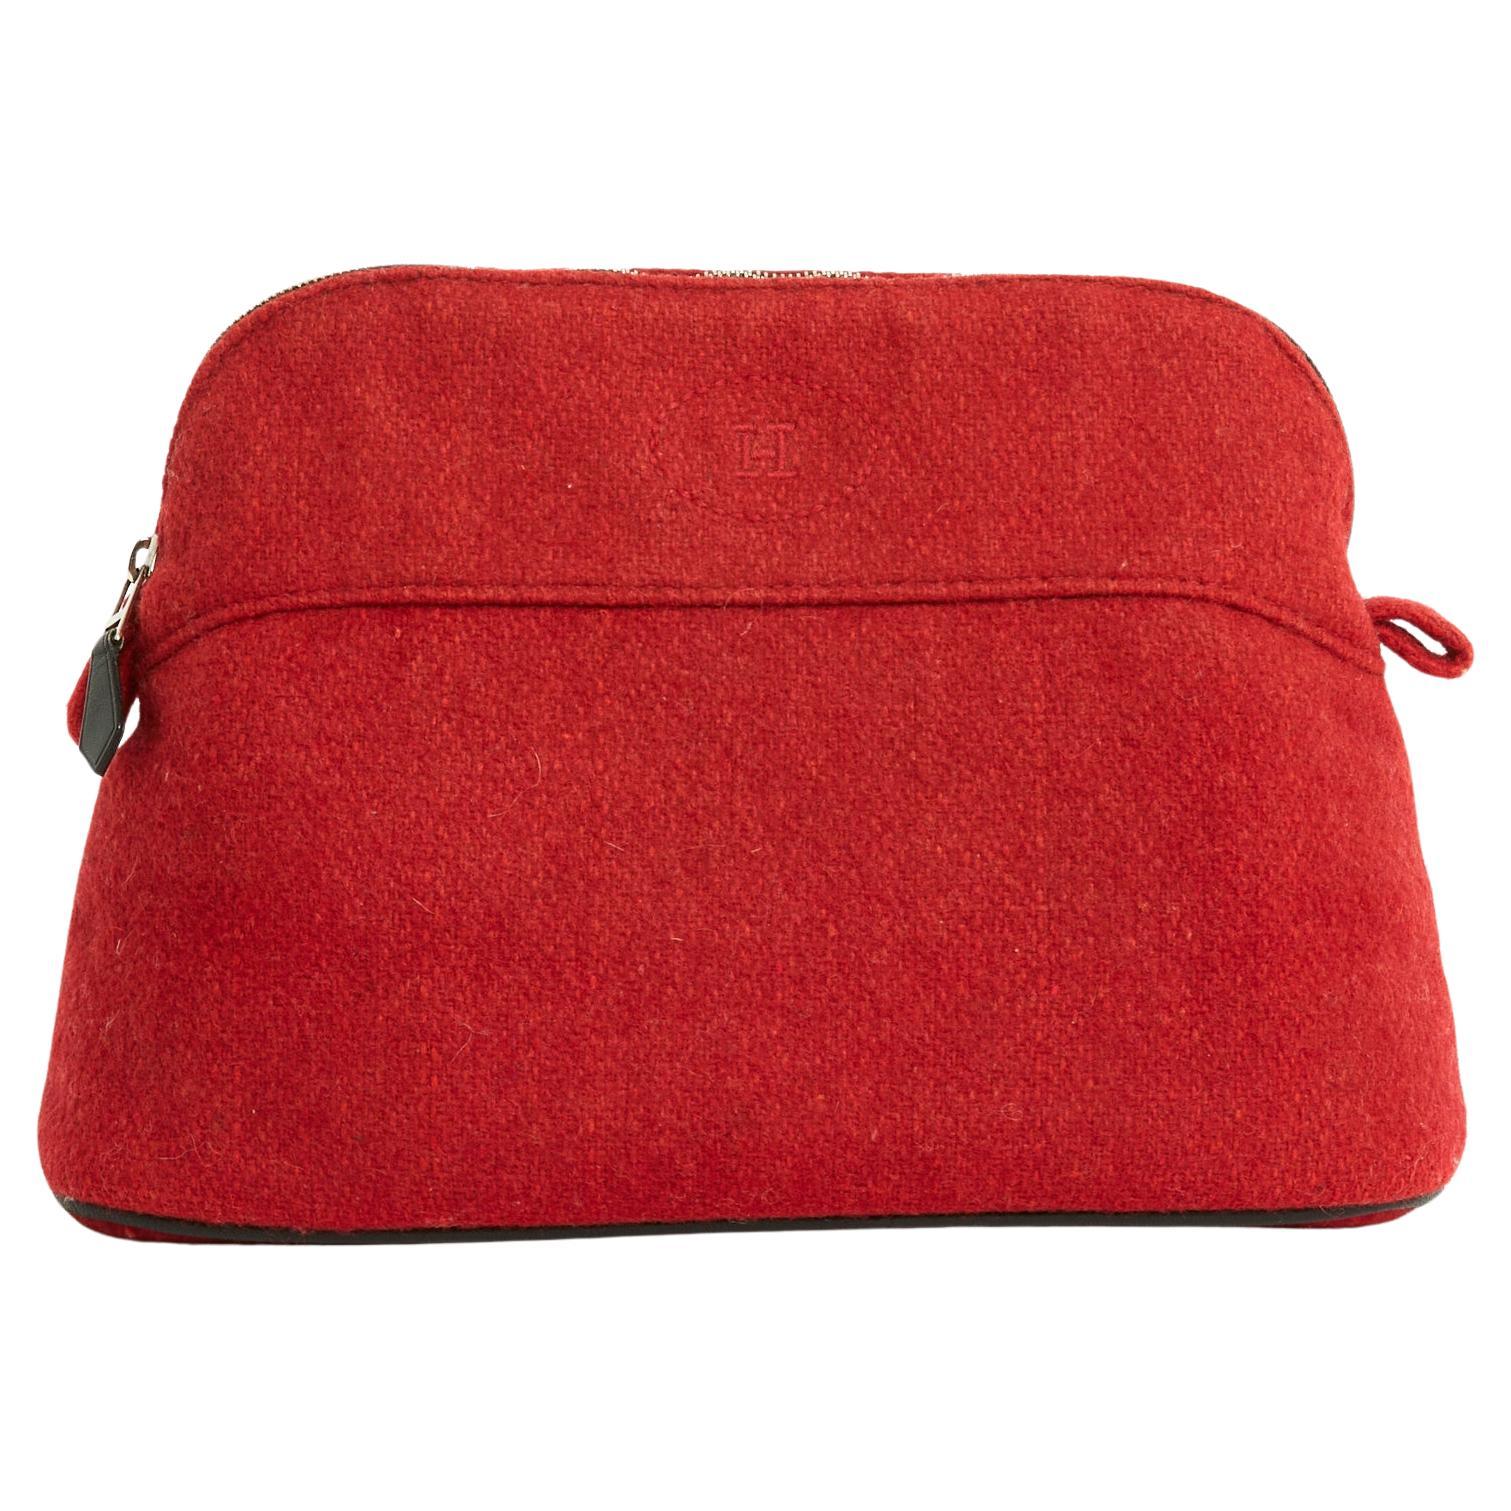 2020 Trousse Bolide MM Wool Red For Sale